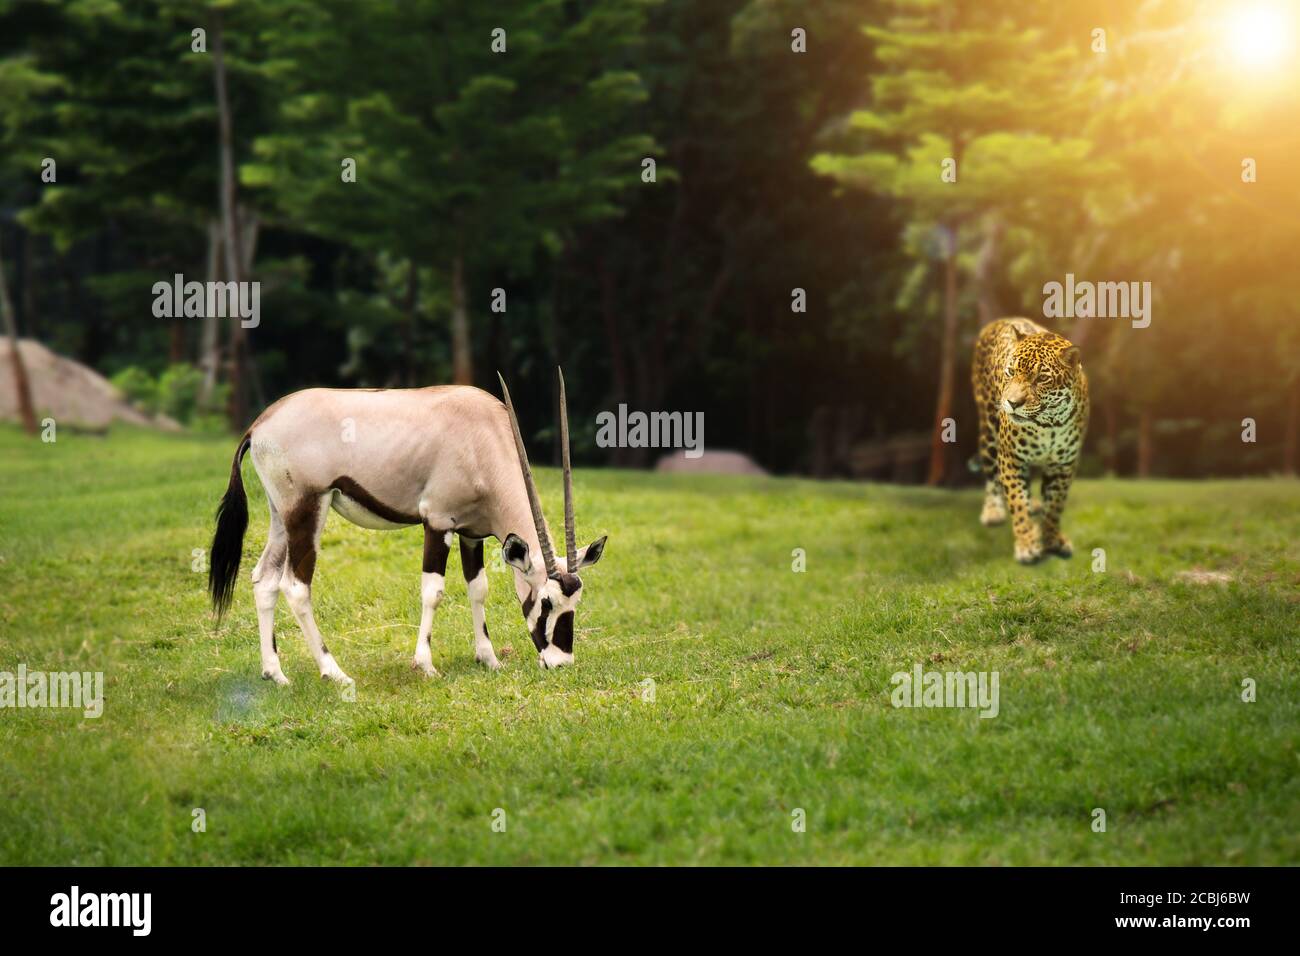 Animal wild life hunting food chain concept : leopard looking at Gemsbok (Gemsbuck) at green forest Stock Photo